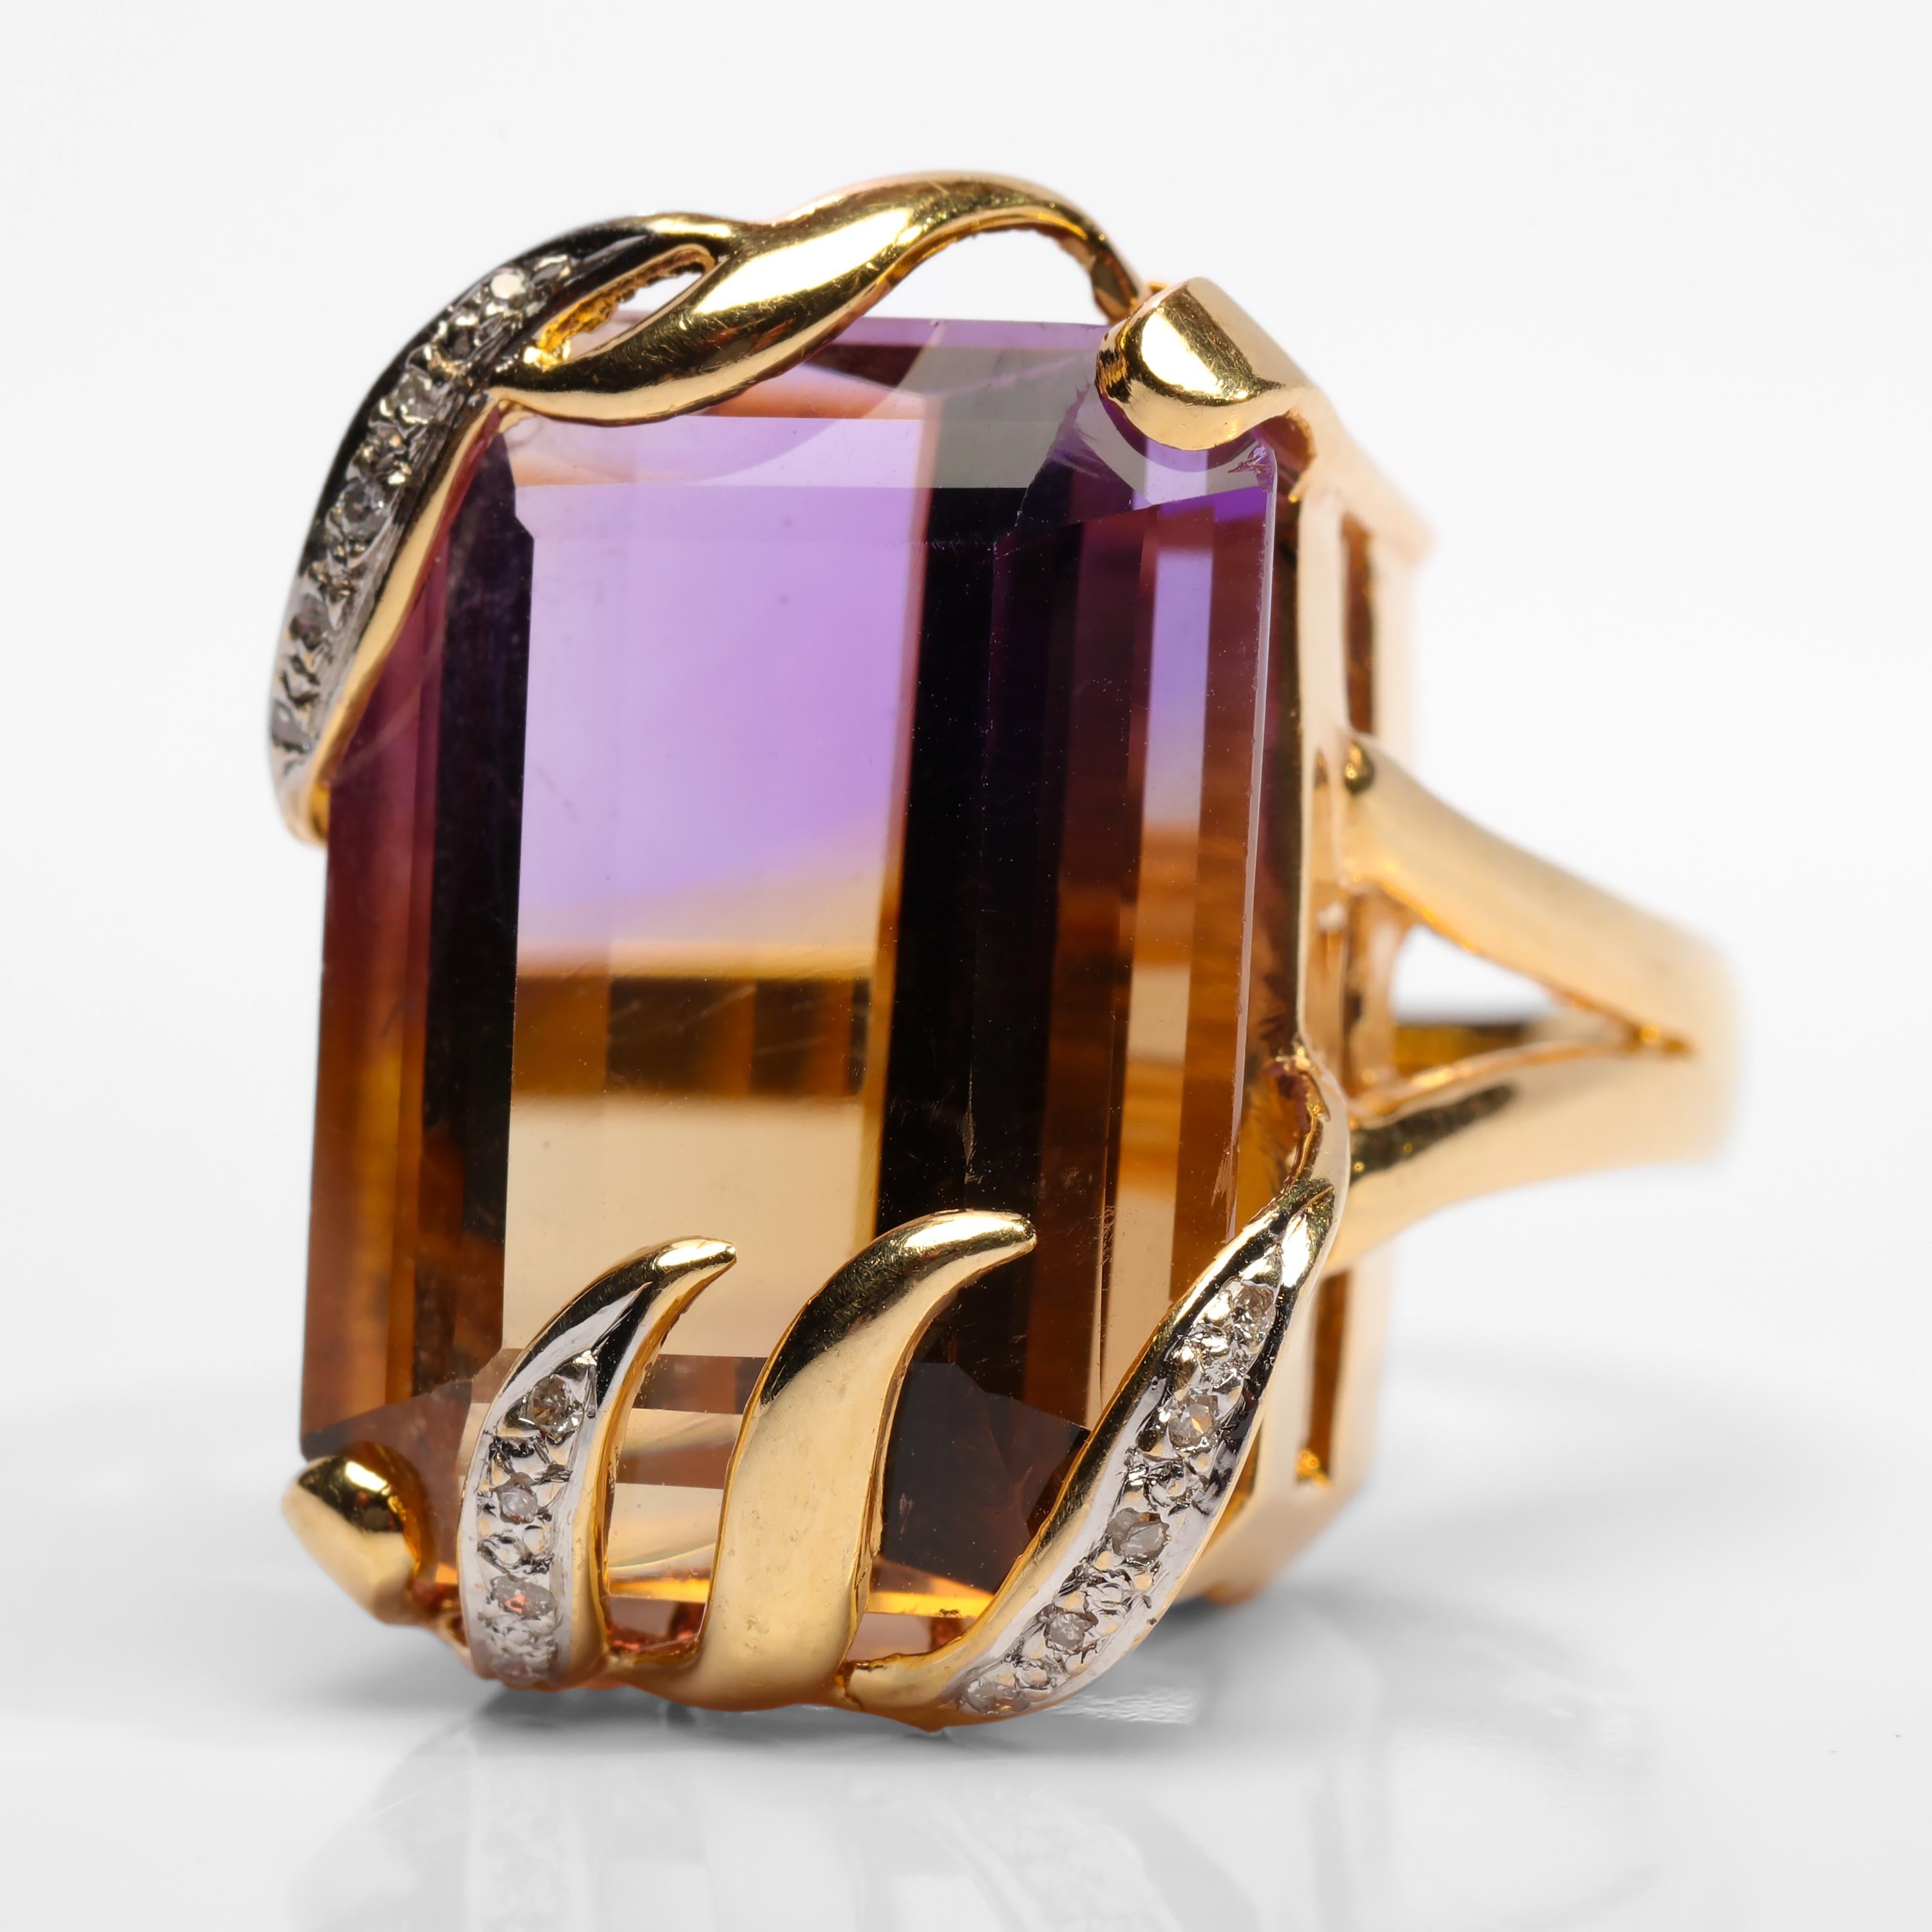 This exuberant, stylish and unique ring from the Midcentury features a sizeable emerald-cut ametrine gem. Ametrine is a naturally-occurring blend of citrine and ametrine that is the result of temperature changes that occur when the gemstone is